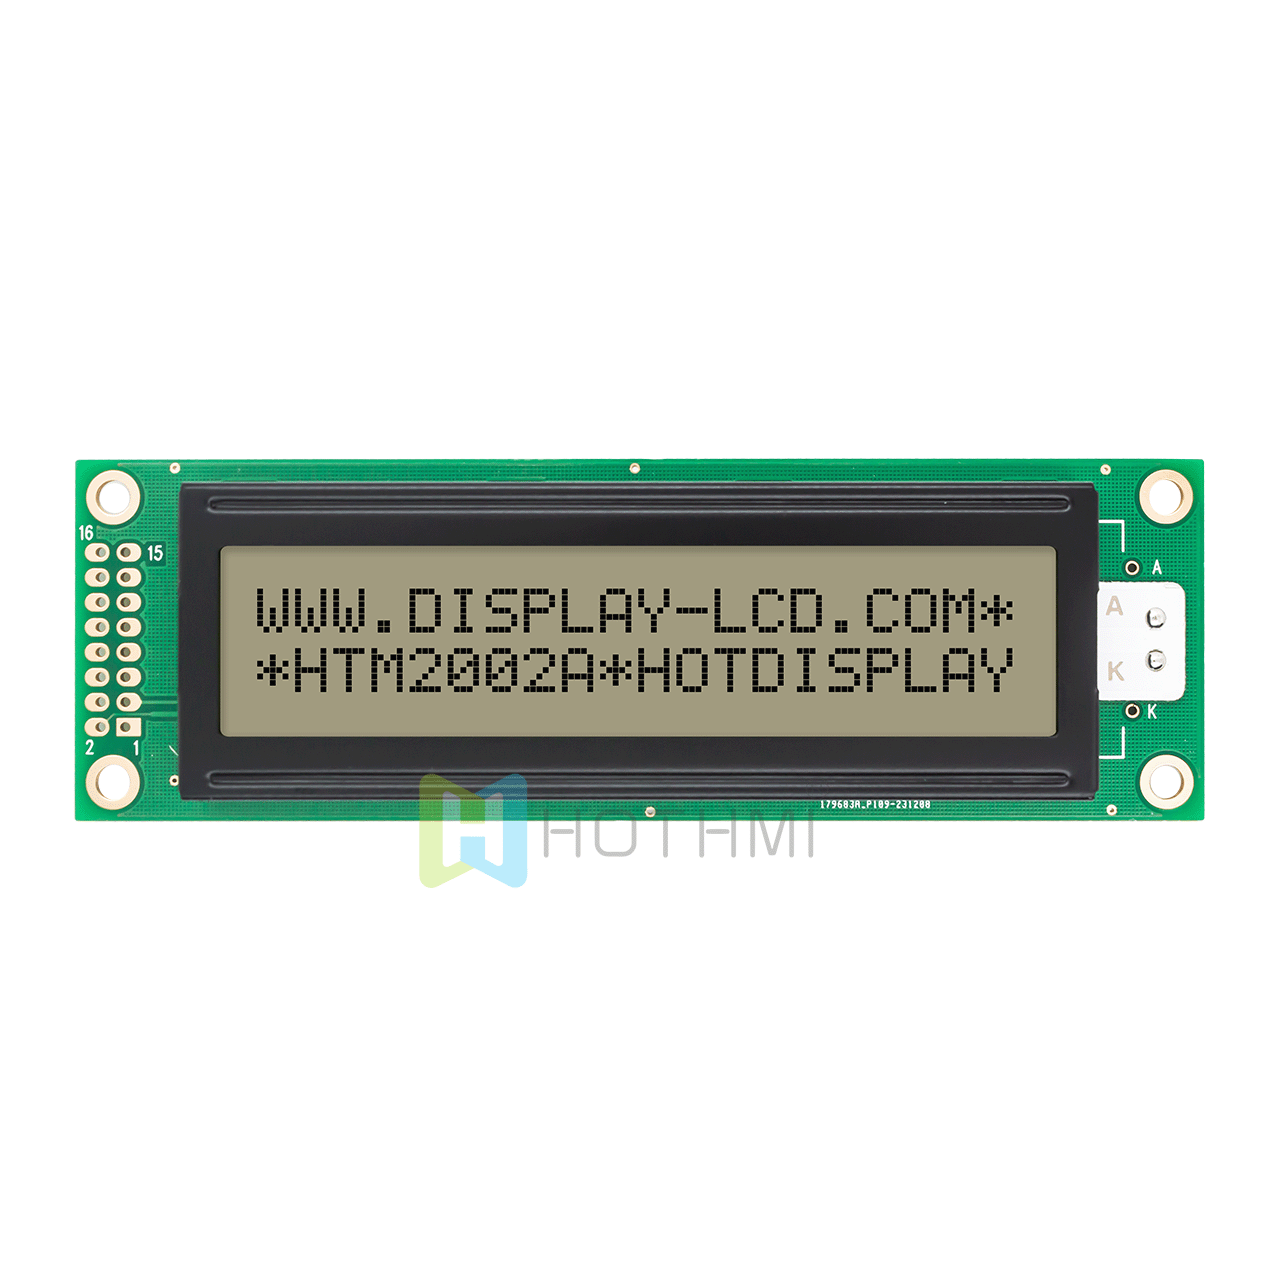 Monochrome 2X20 character LCD Module | FSTN+ white background gray character display with white backlight + English/Japanese/Russian character library | 5.0v| STU7066U | Adruino